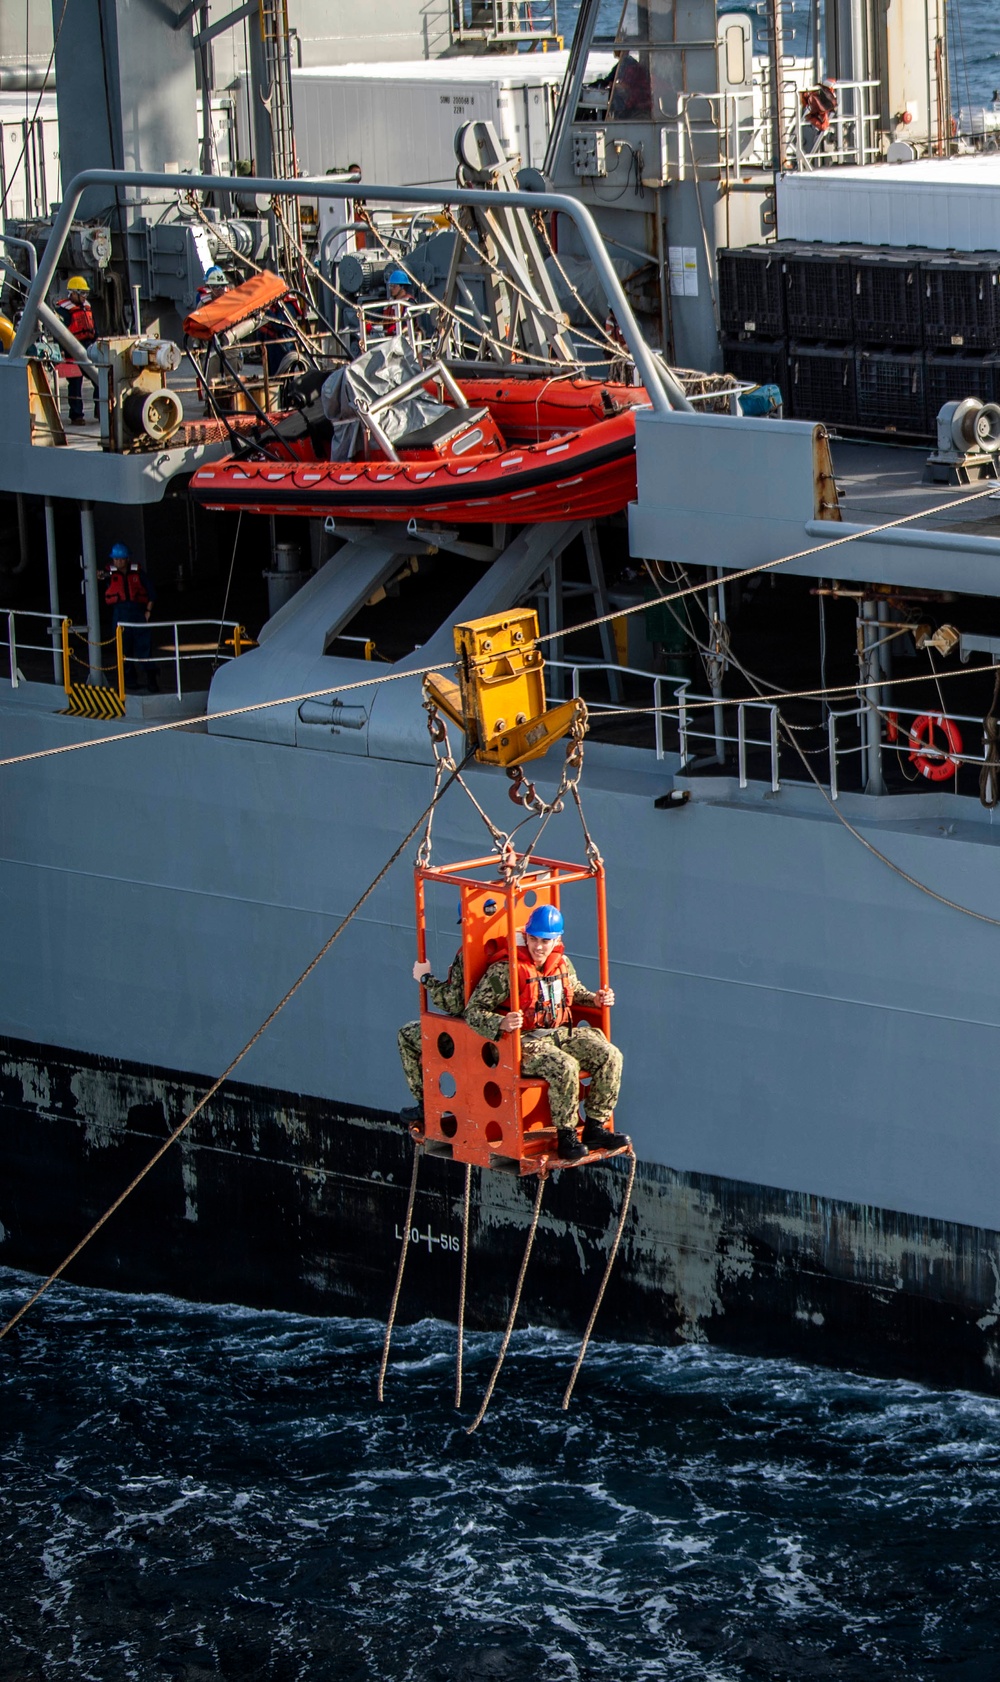 USS Milius (DDG 69) Conducts a Replenishment-at-Sea with USNS Pecos (T-AO 197)